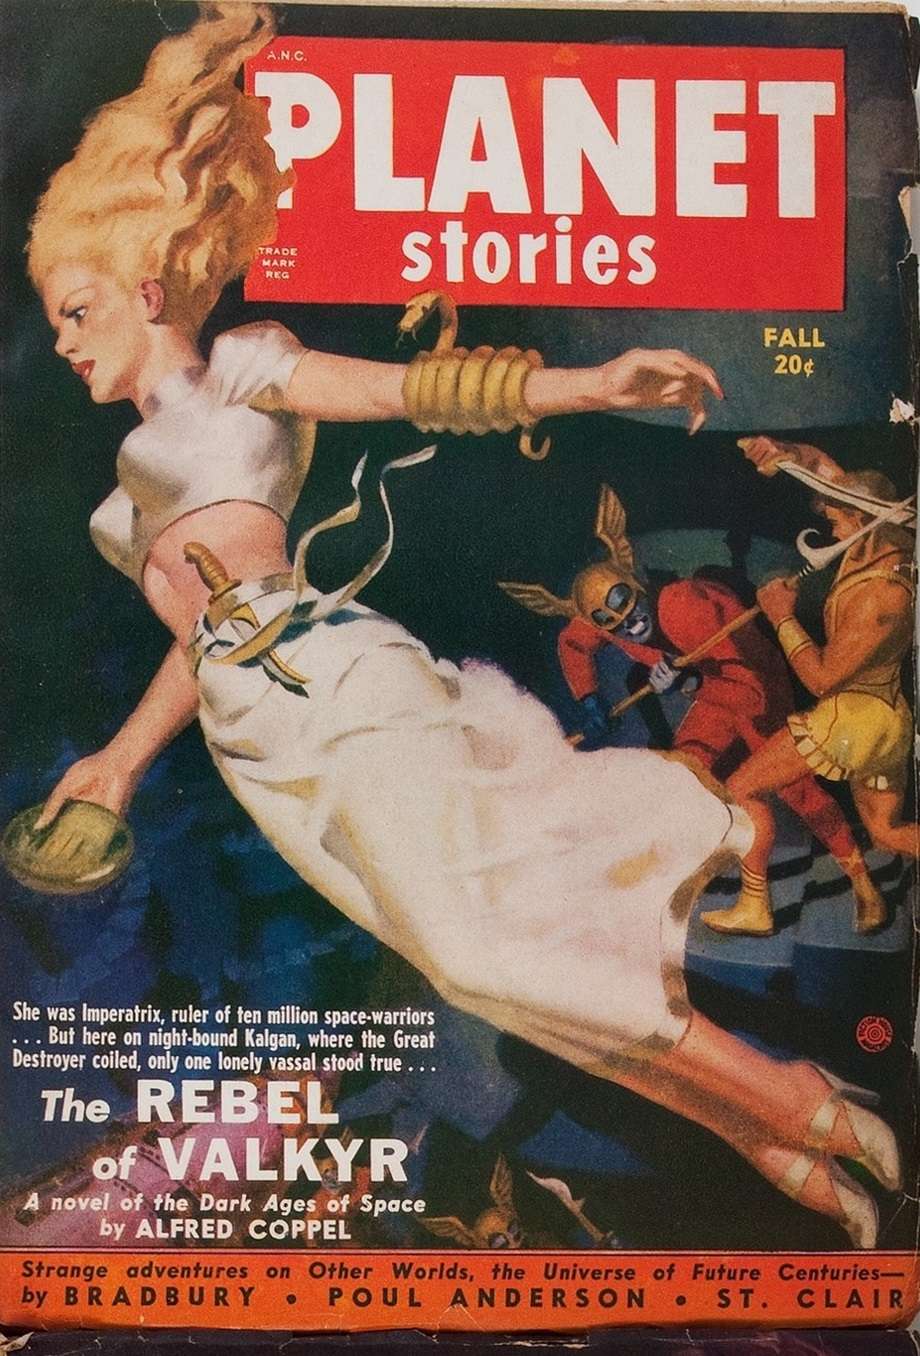 Comic Book Cover For Planet Stories v4 8 - The Rebel of Valkyr - Alfred Coppel, Jr.